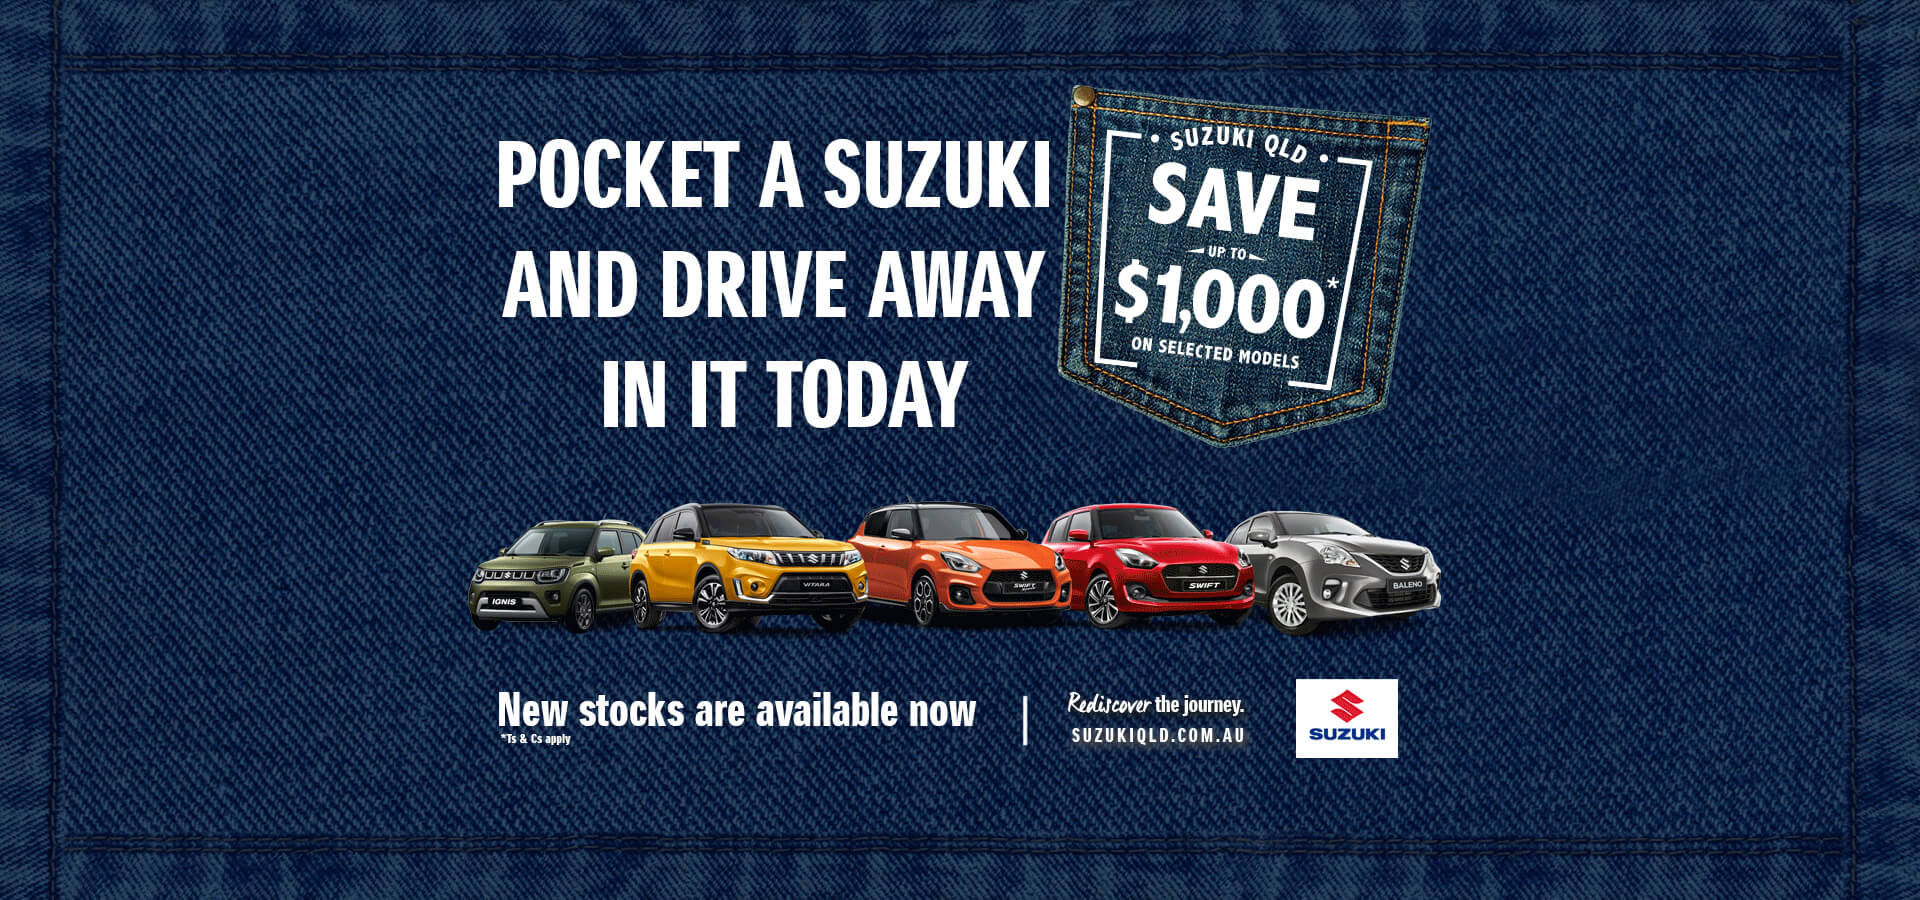 Pocket a Suzuki and drive away in it today.